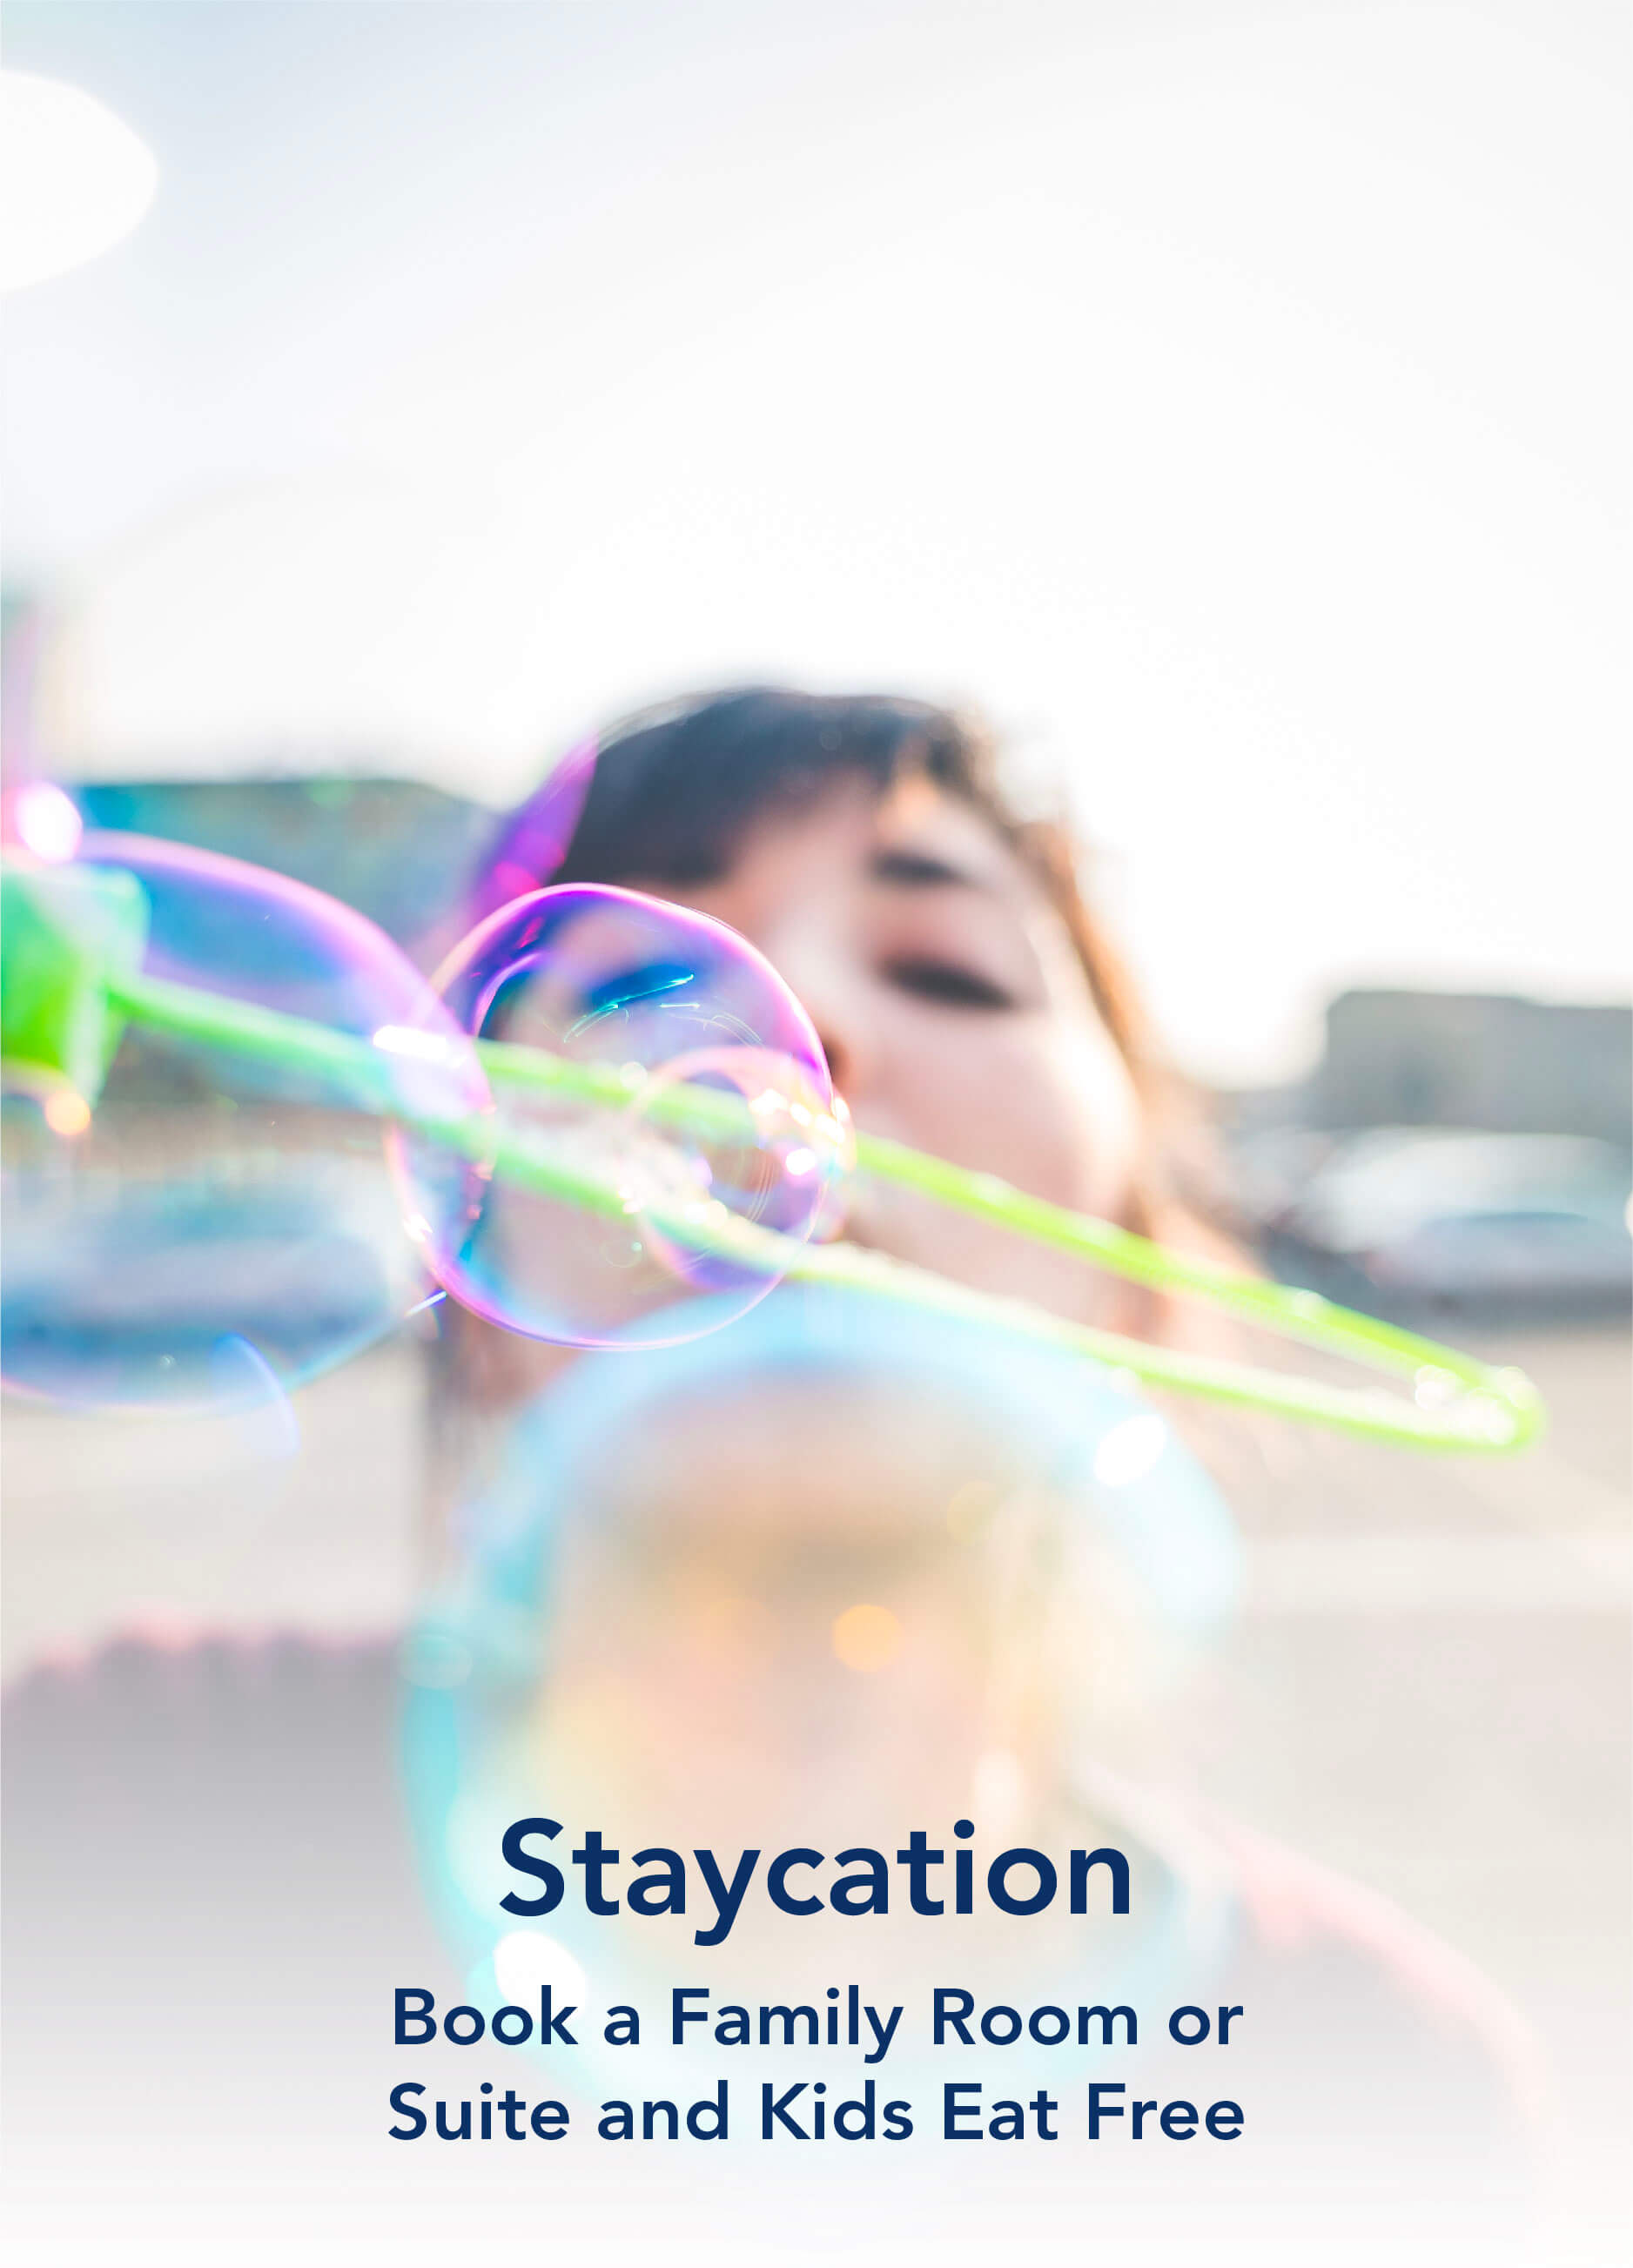 Book A Family Room For Staycation & Get Foods Free For Kids